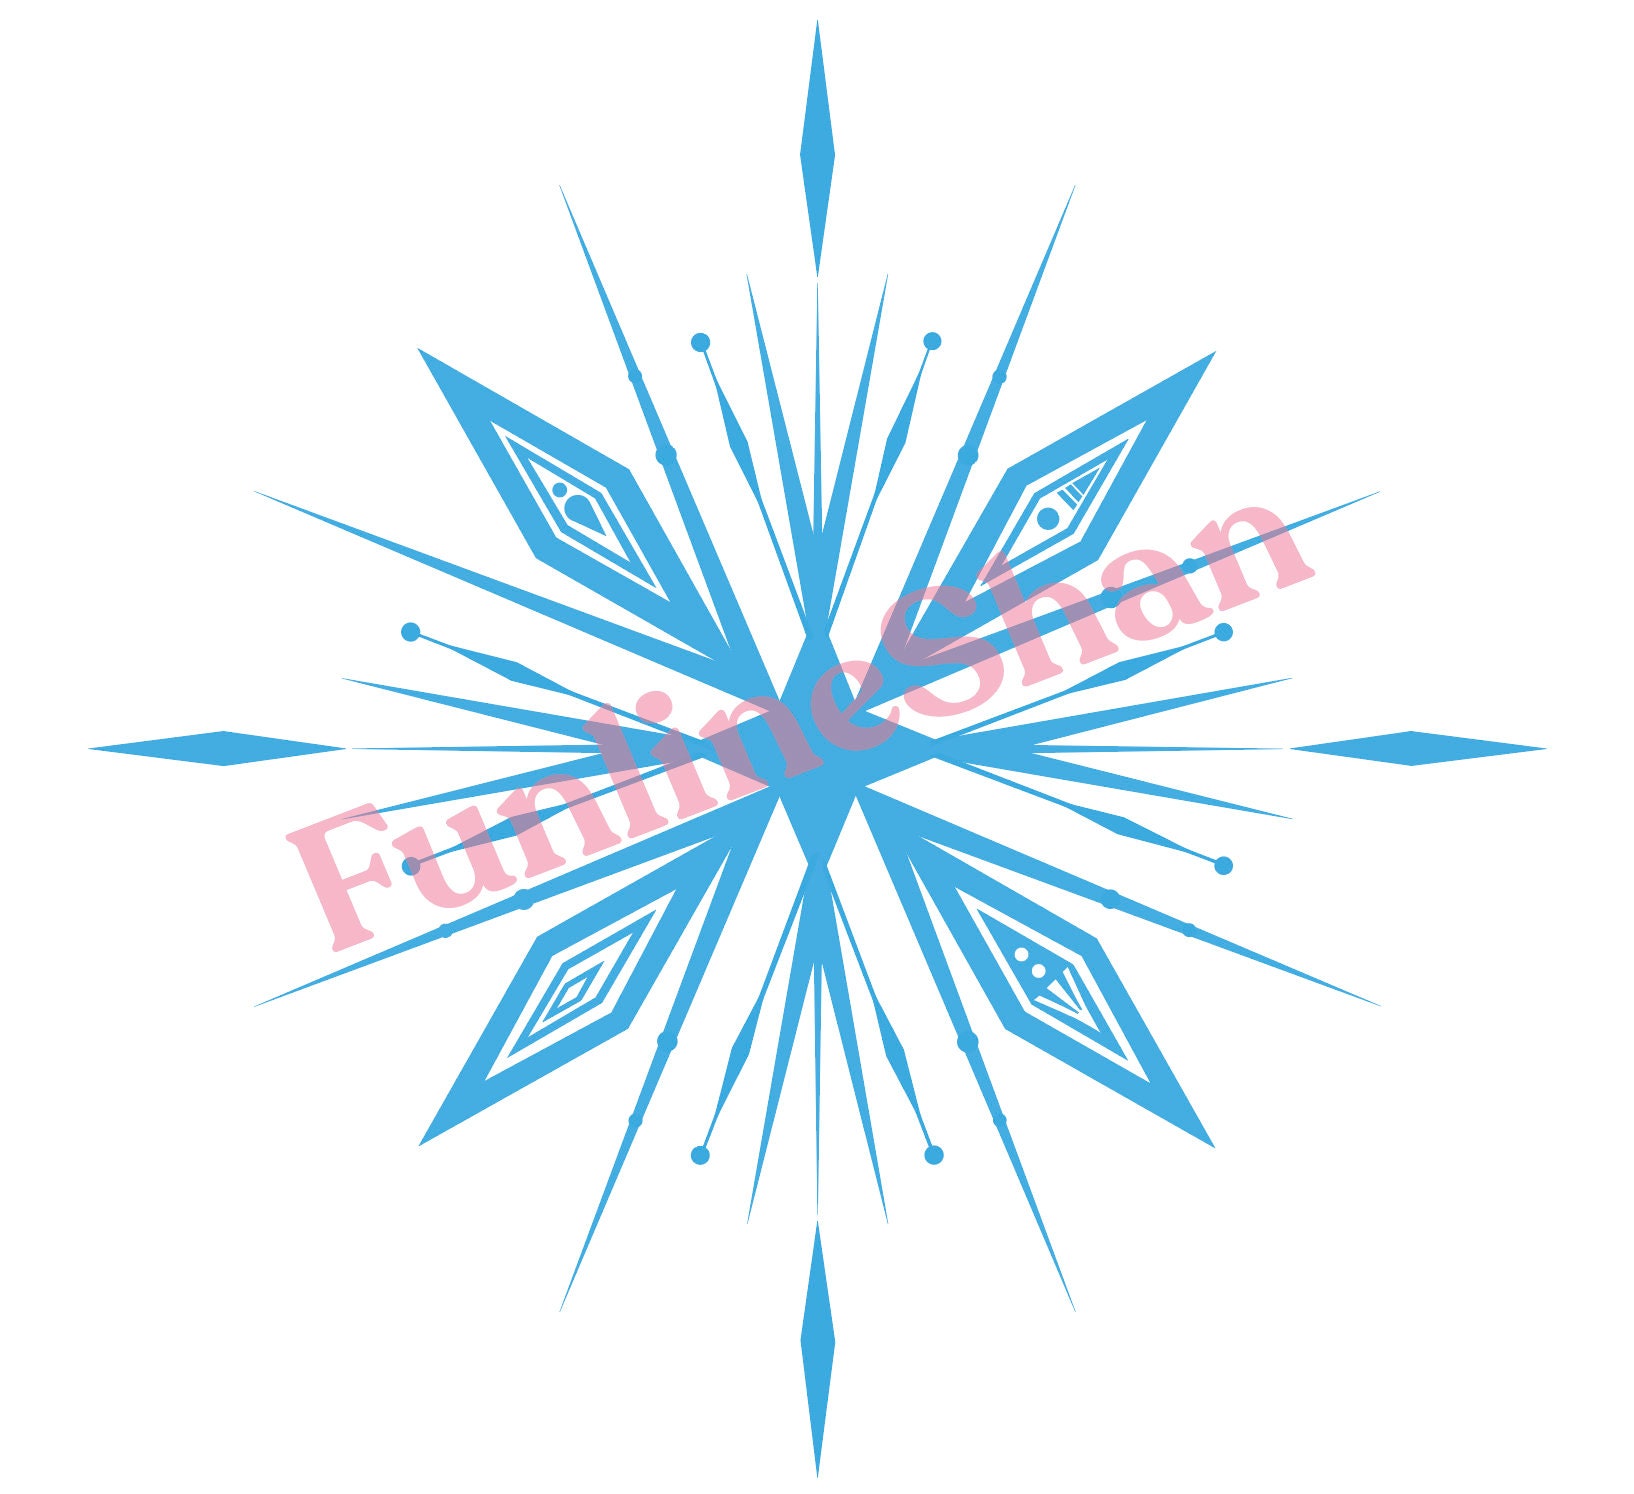 Silver Snowflake PNG, Glitter Snowflakes PNG, Snowflake Clipart, Frozen  Snowflake Overlay, Winter Clipart 